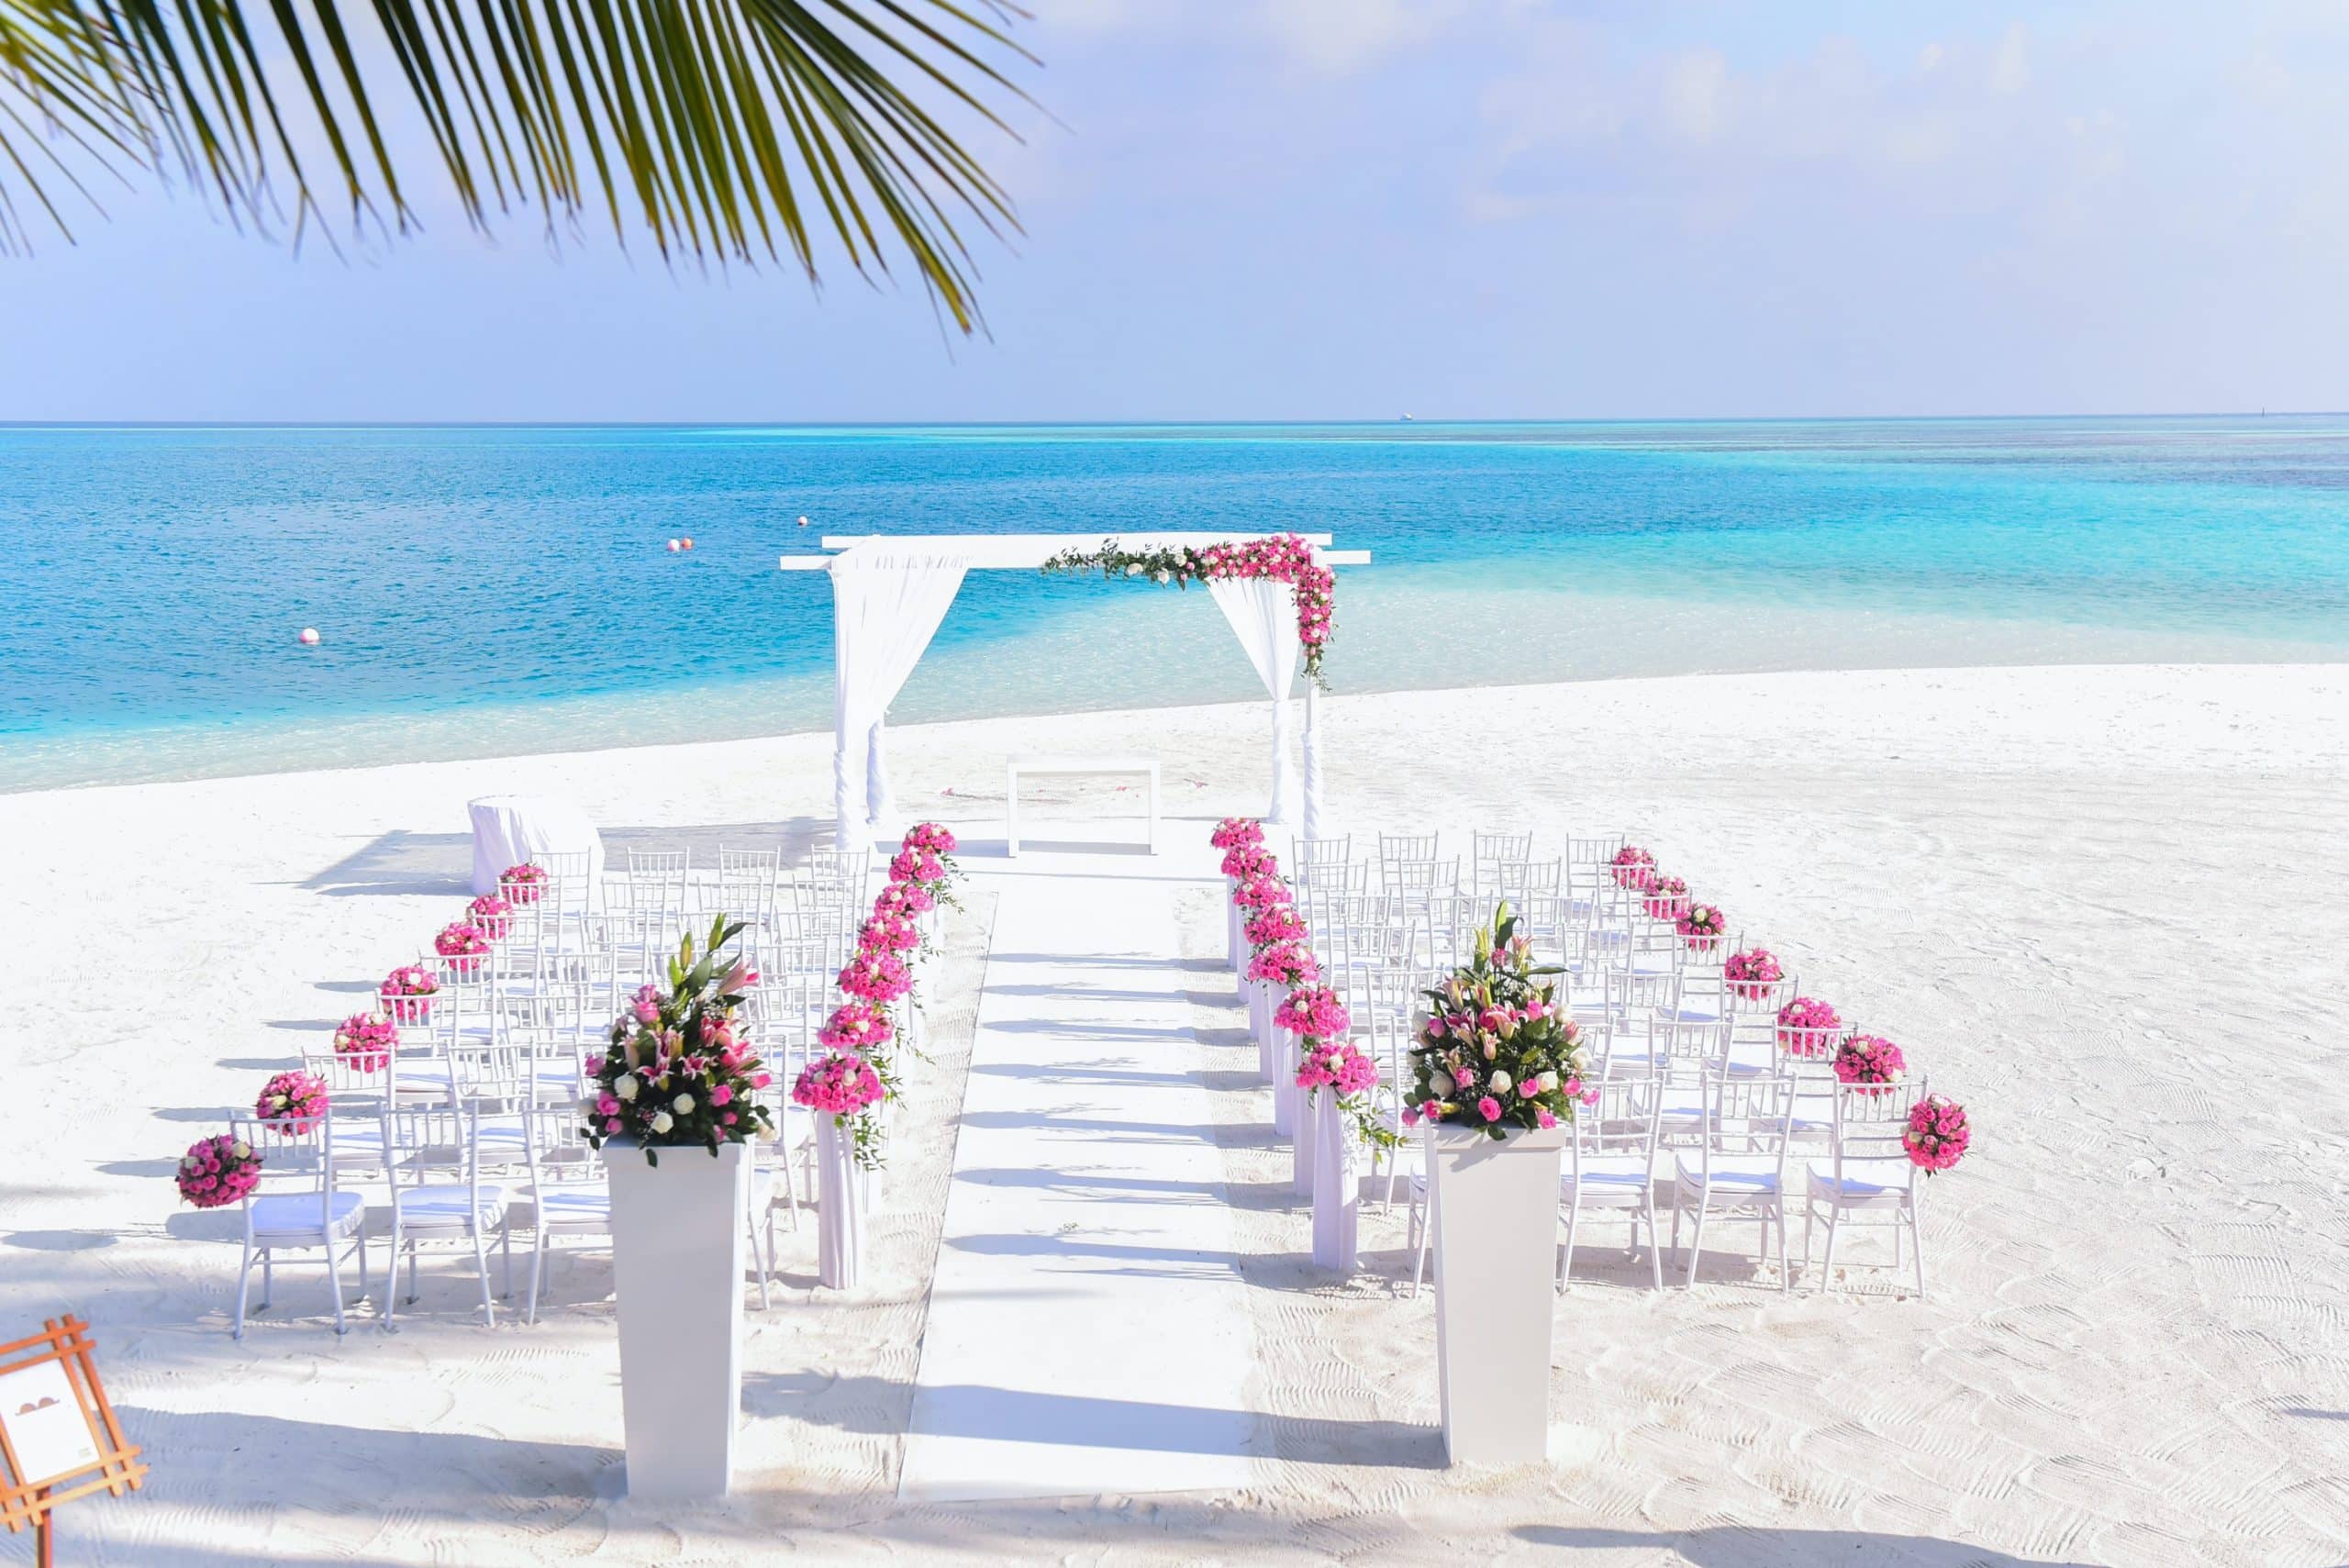 Beach wedding set up with no guests